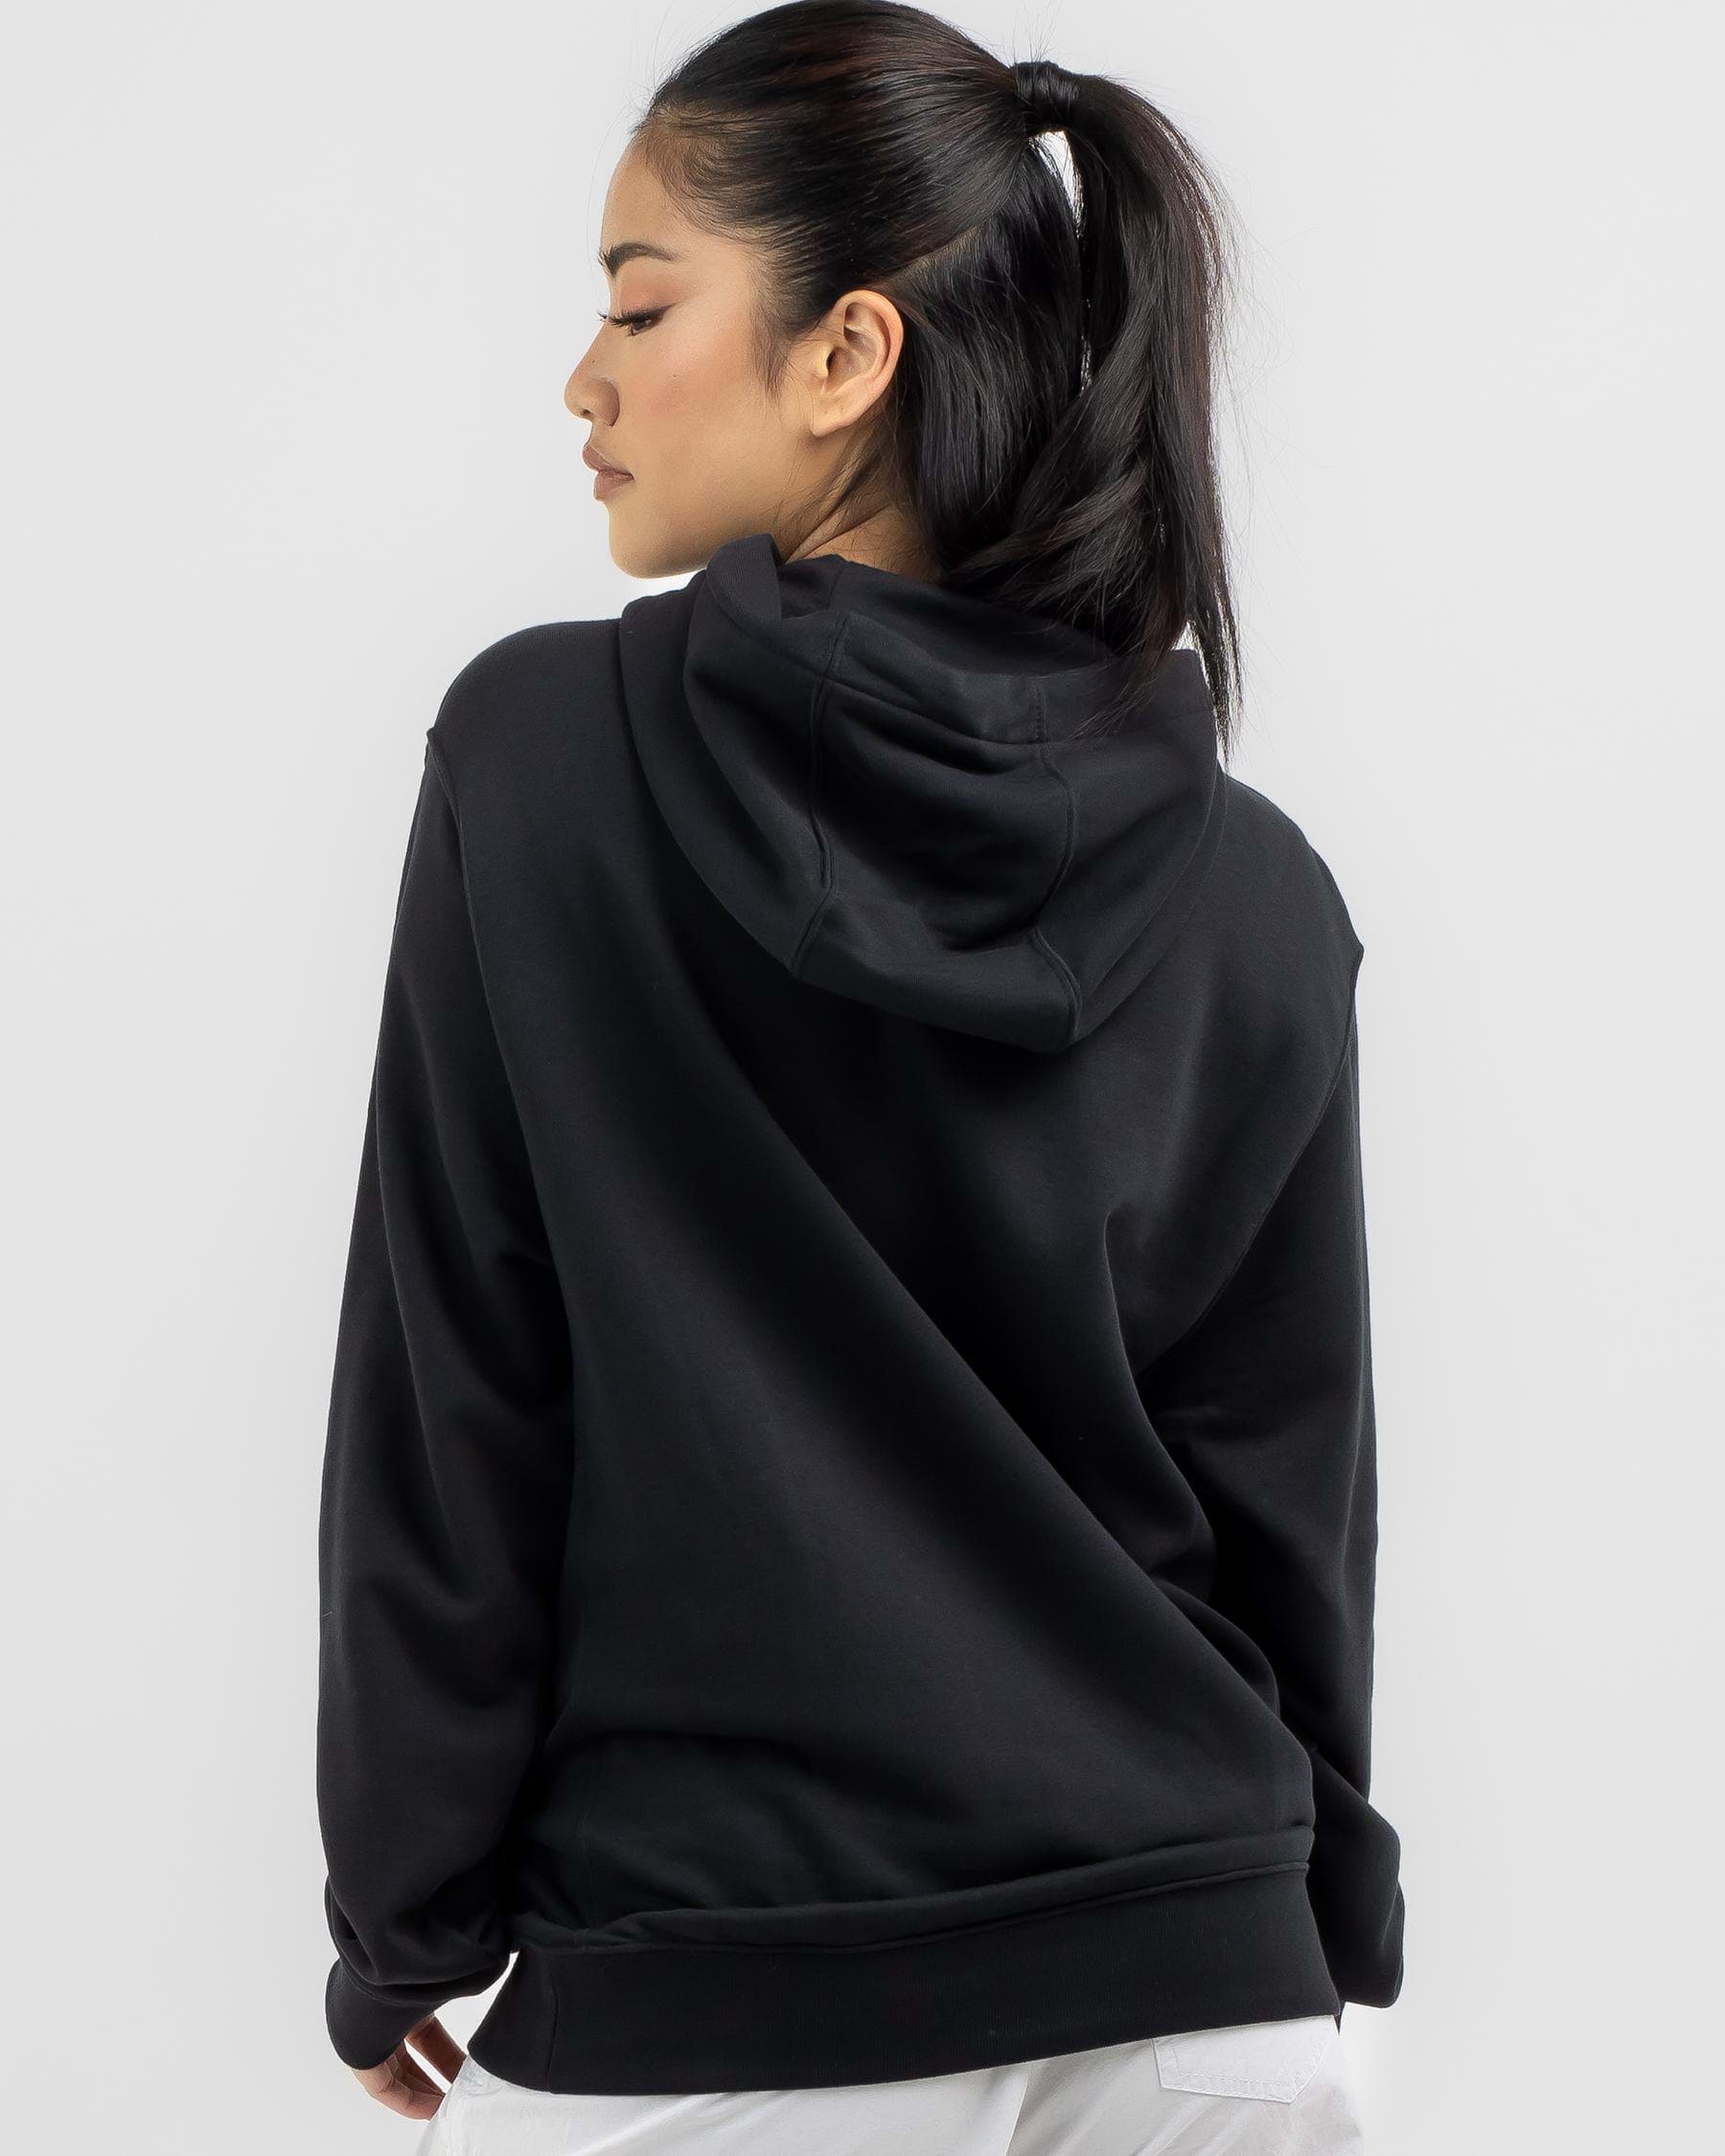 Shop Nike French Terry Fleece Hoodie In Black/black - Fast Shipping ...